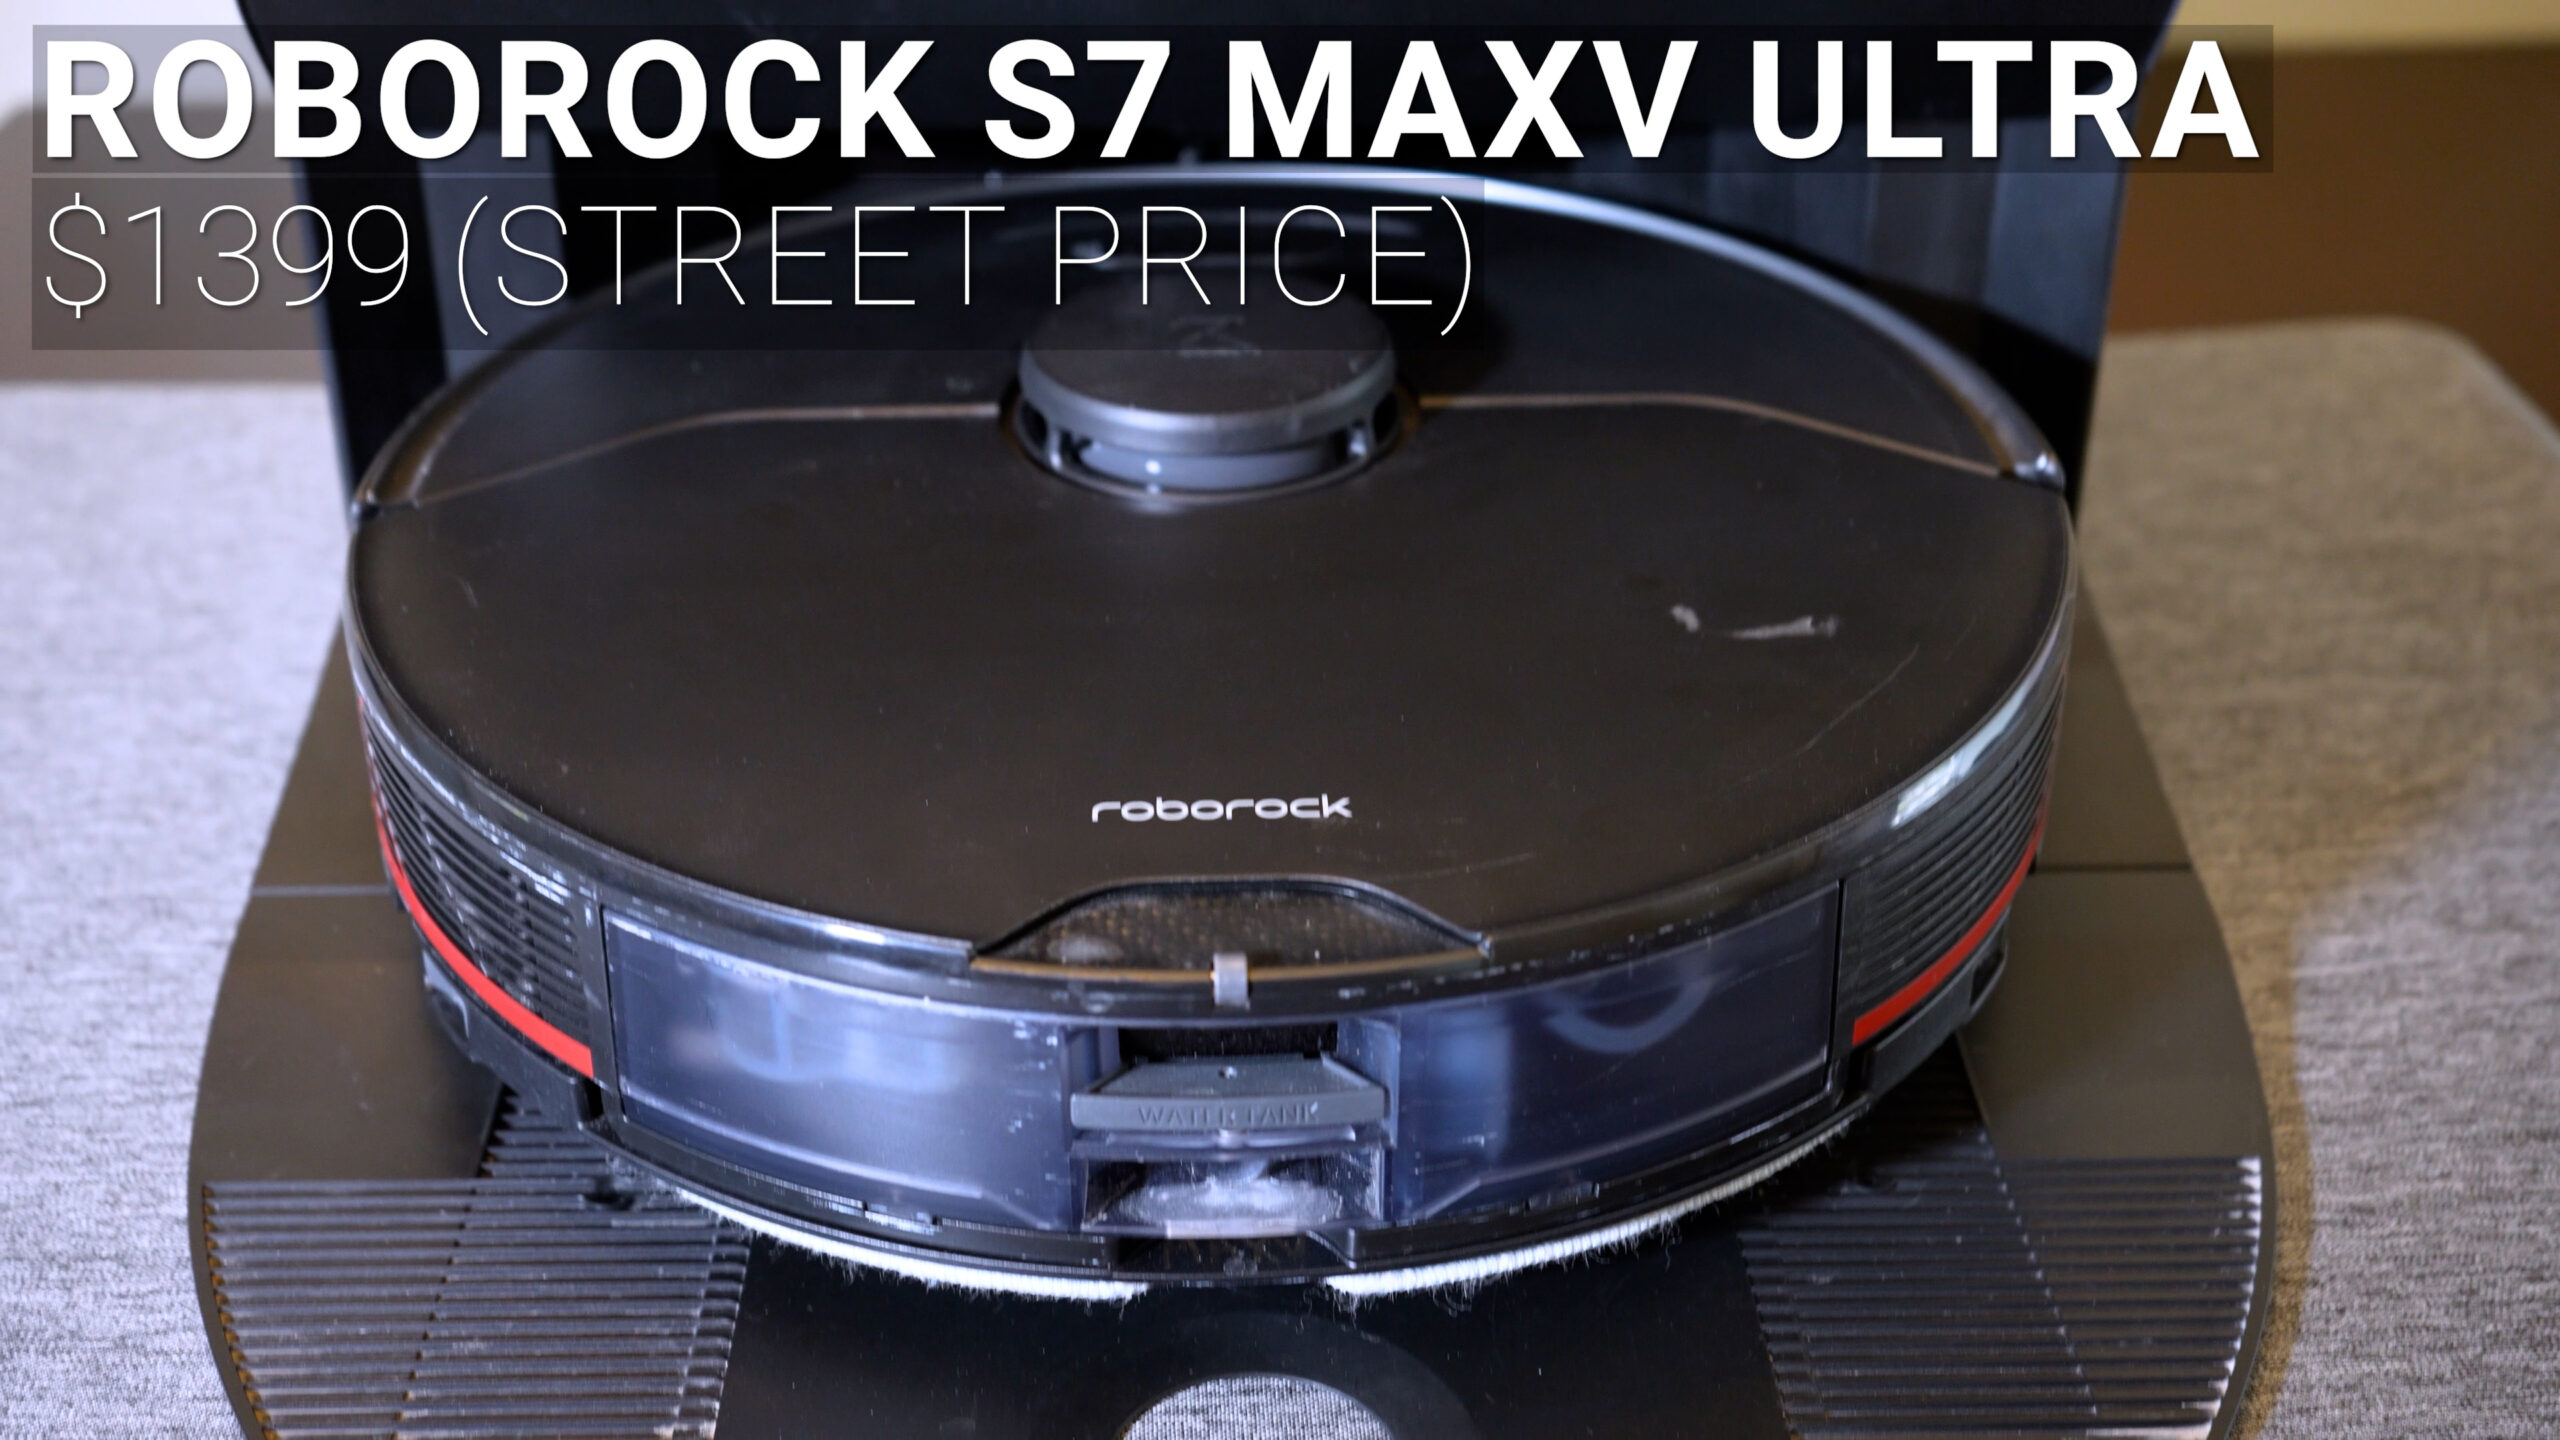 The Roborock S7 MaxV Ultra with a fully automated docking station is now  available -  News